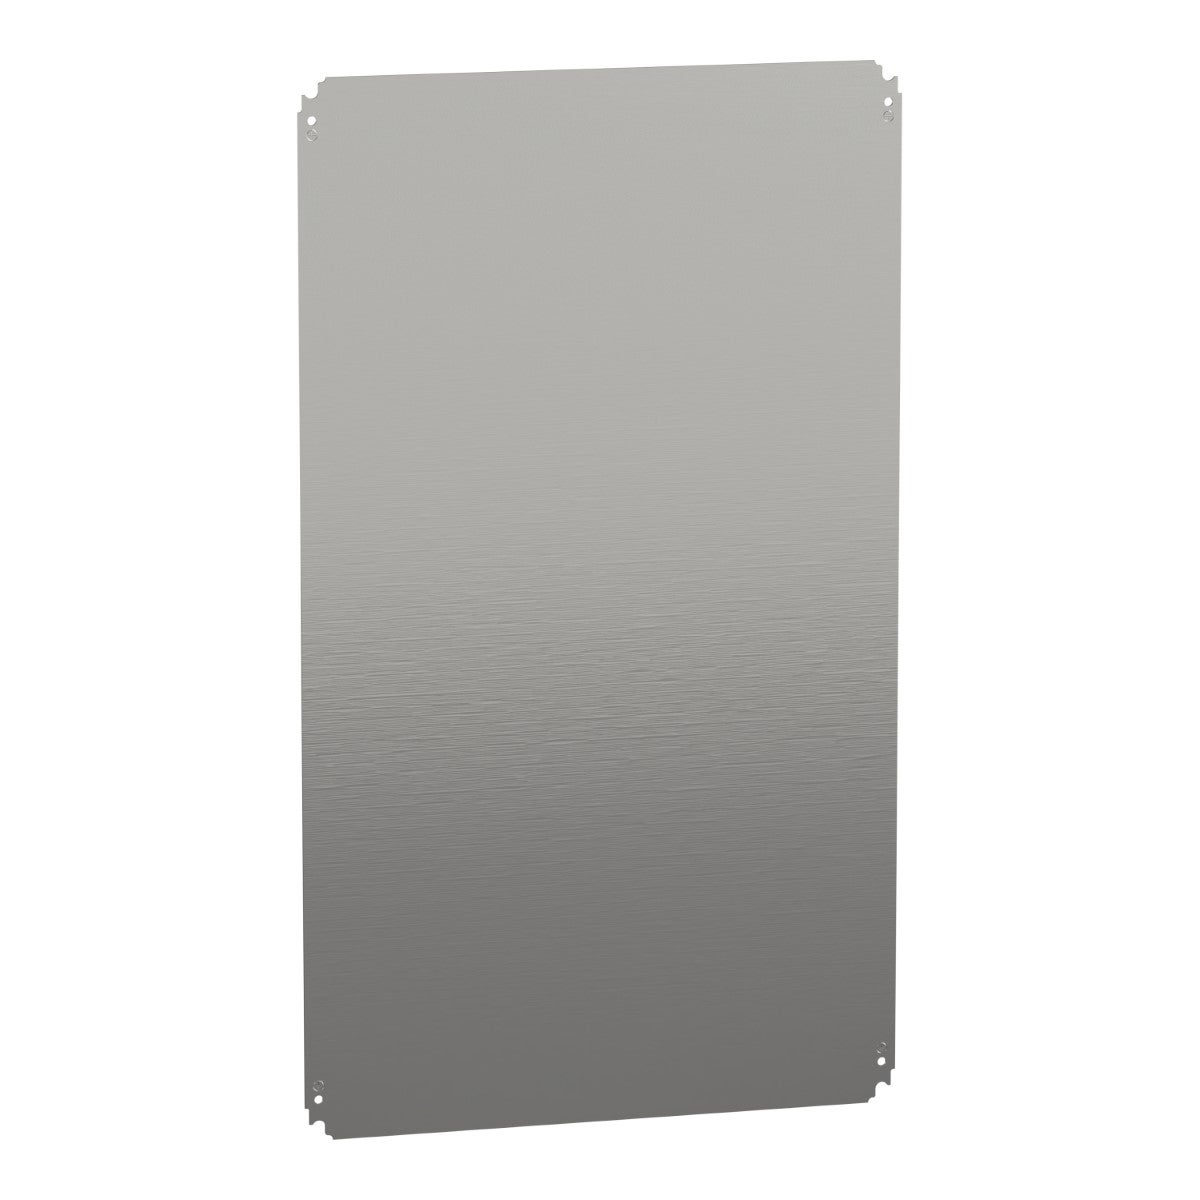 Plain mounting plate H1000xW600mm made of galvanised sheet steel